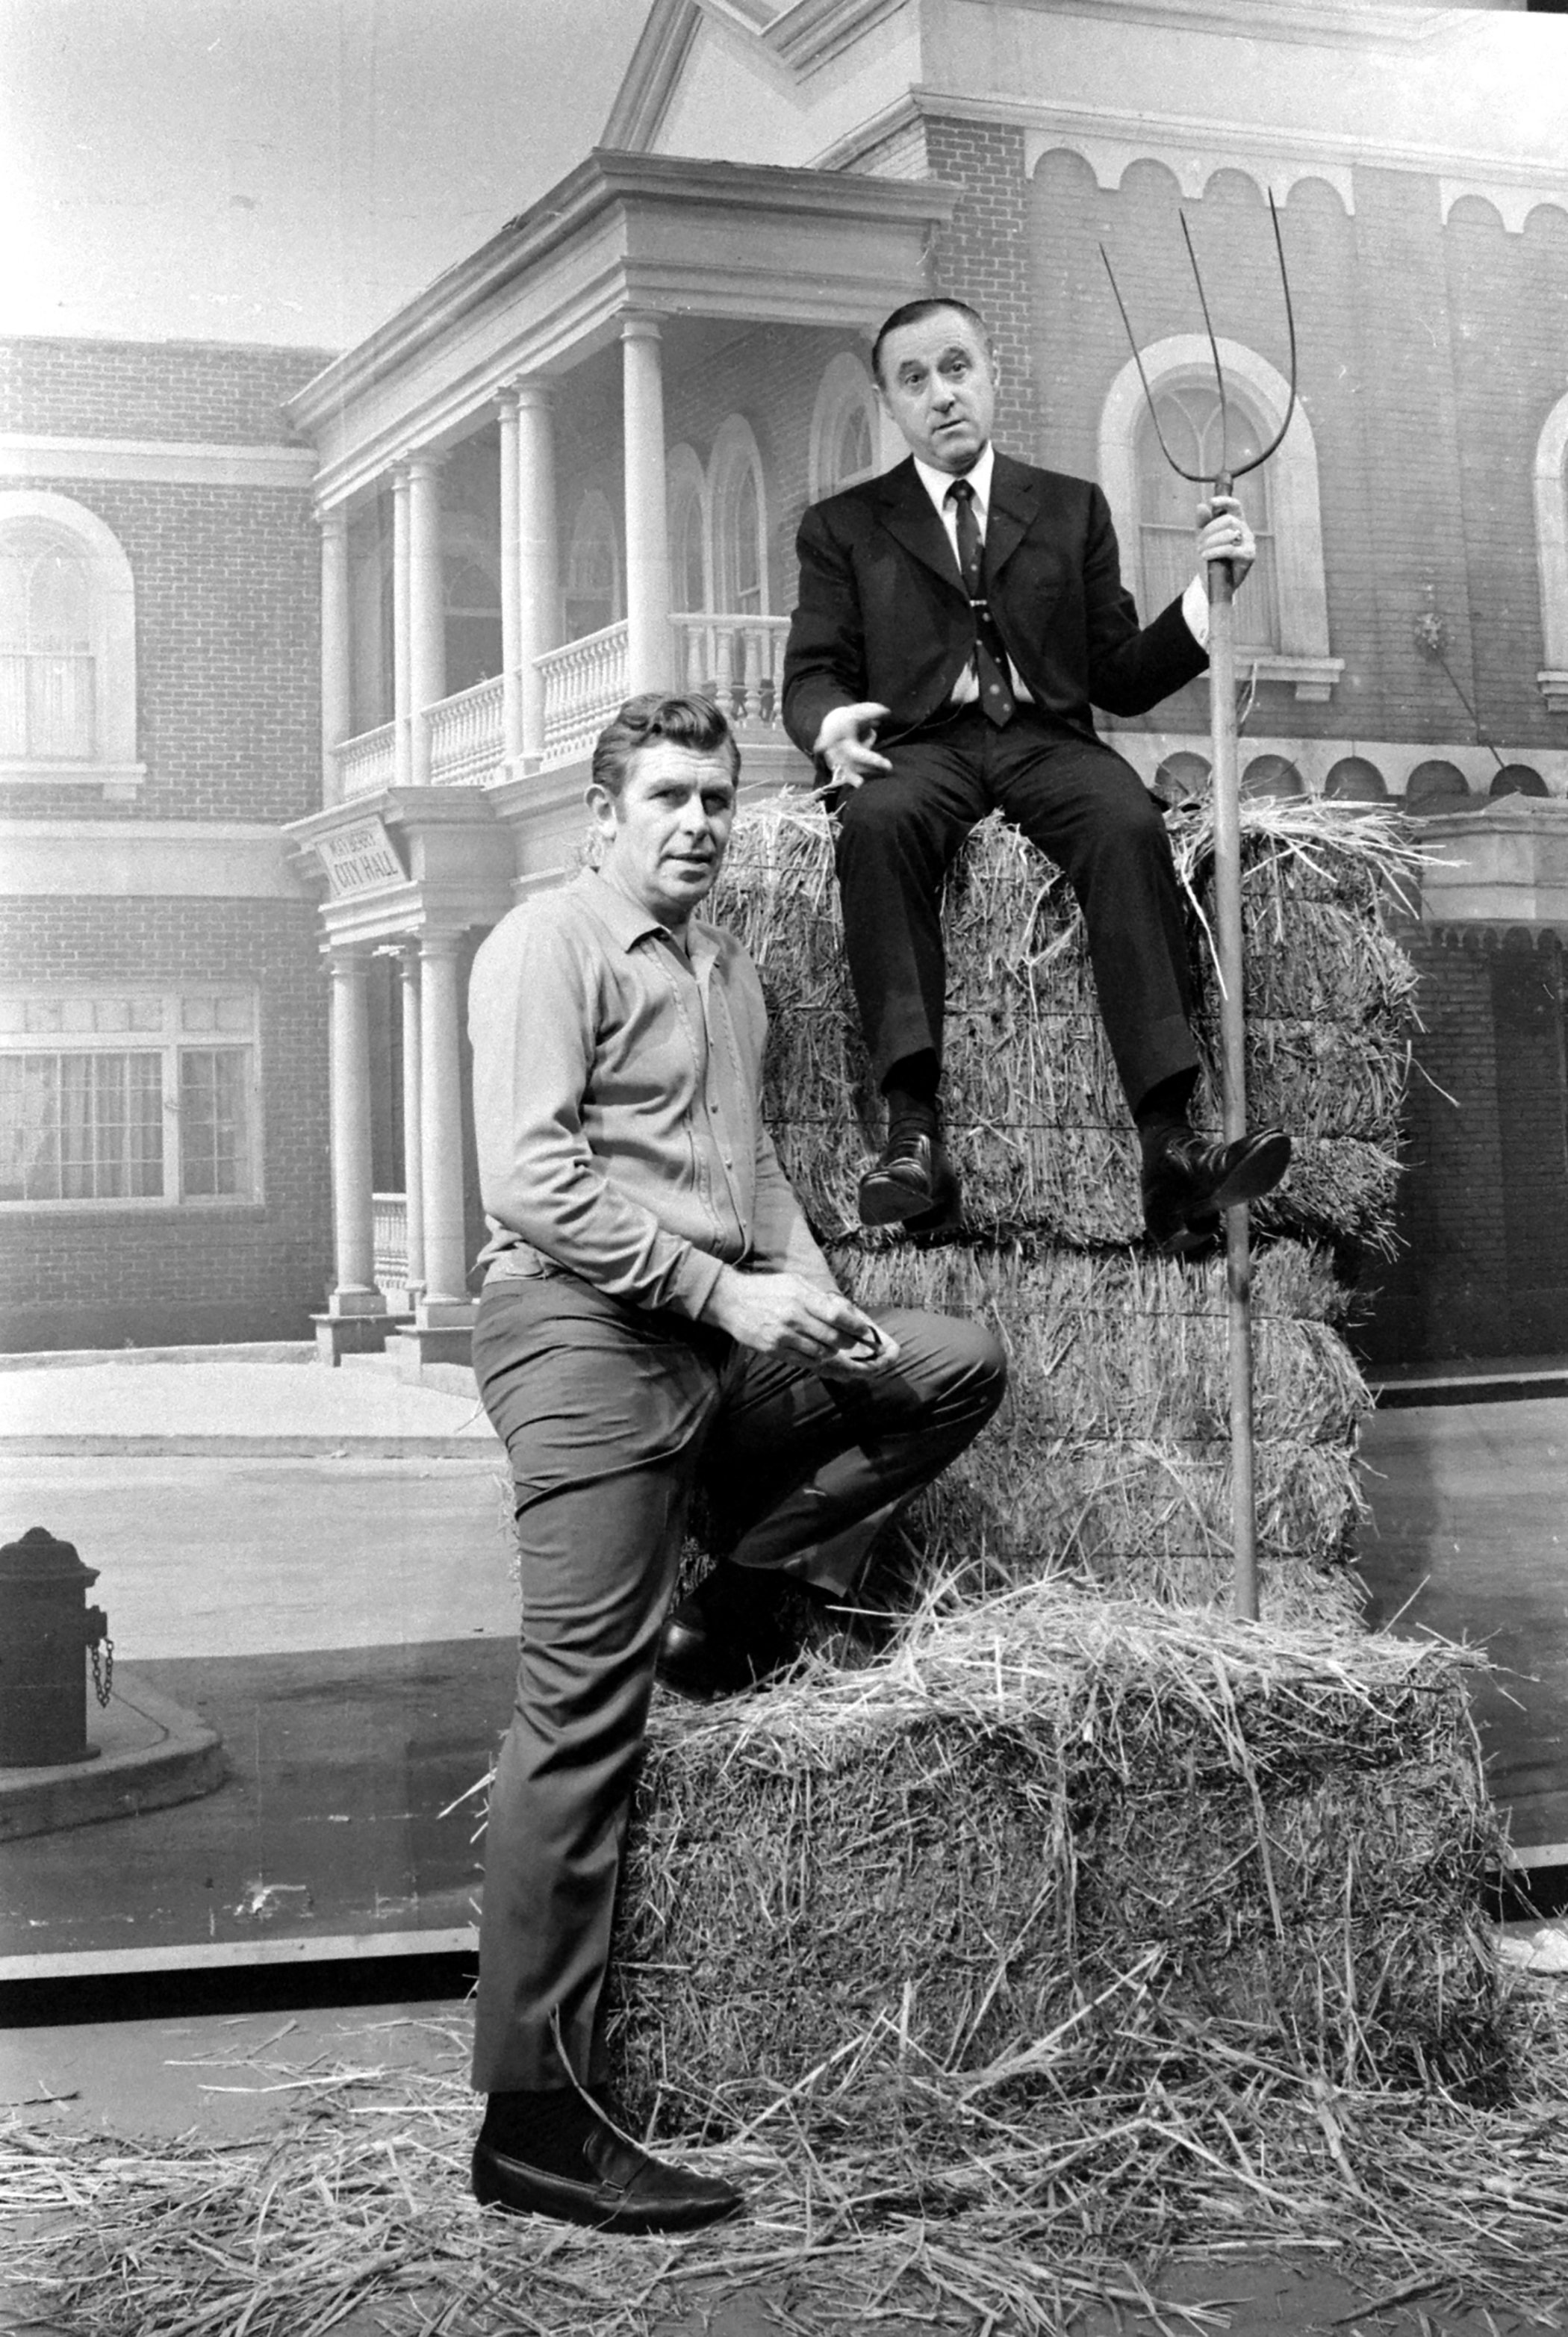 Andy Griffith (left) with his manager Dick Linke in 1969. The two pose on a stack of hay bales.